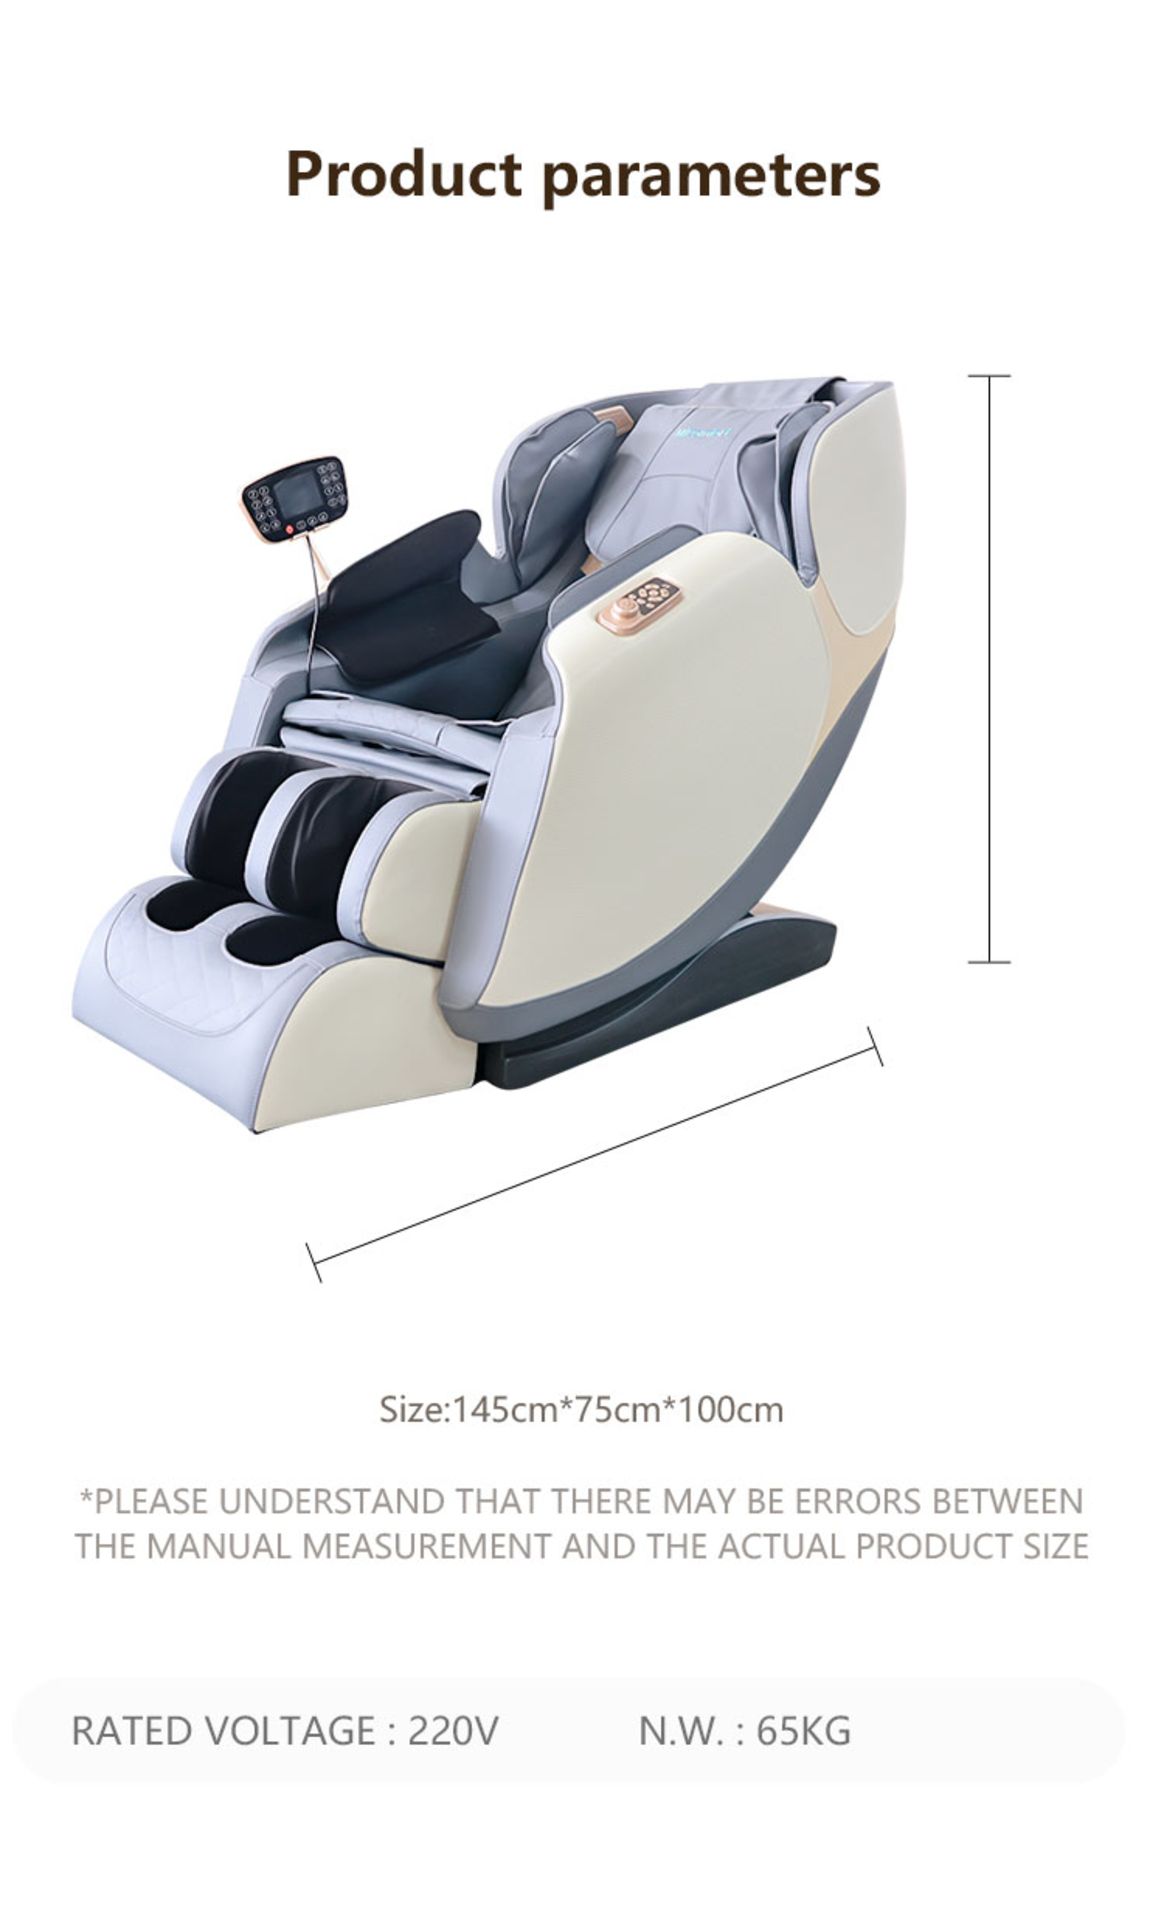 Brand New BOX Orchid White/Grey MiComfort Full Body Massage Chair RRP £2199 AS SEEN ON TV! *NO VAT* - Image 5 of 10